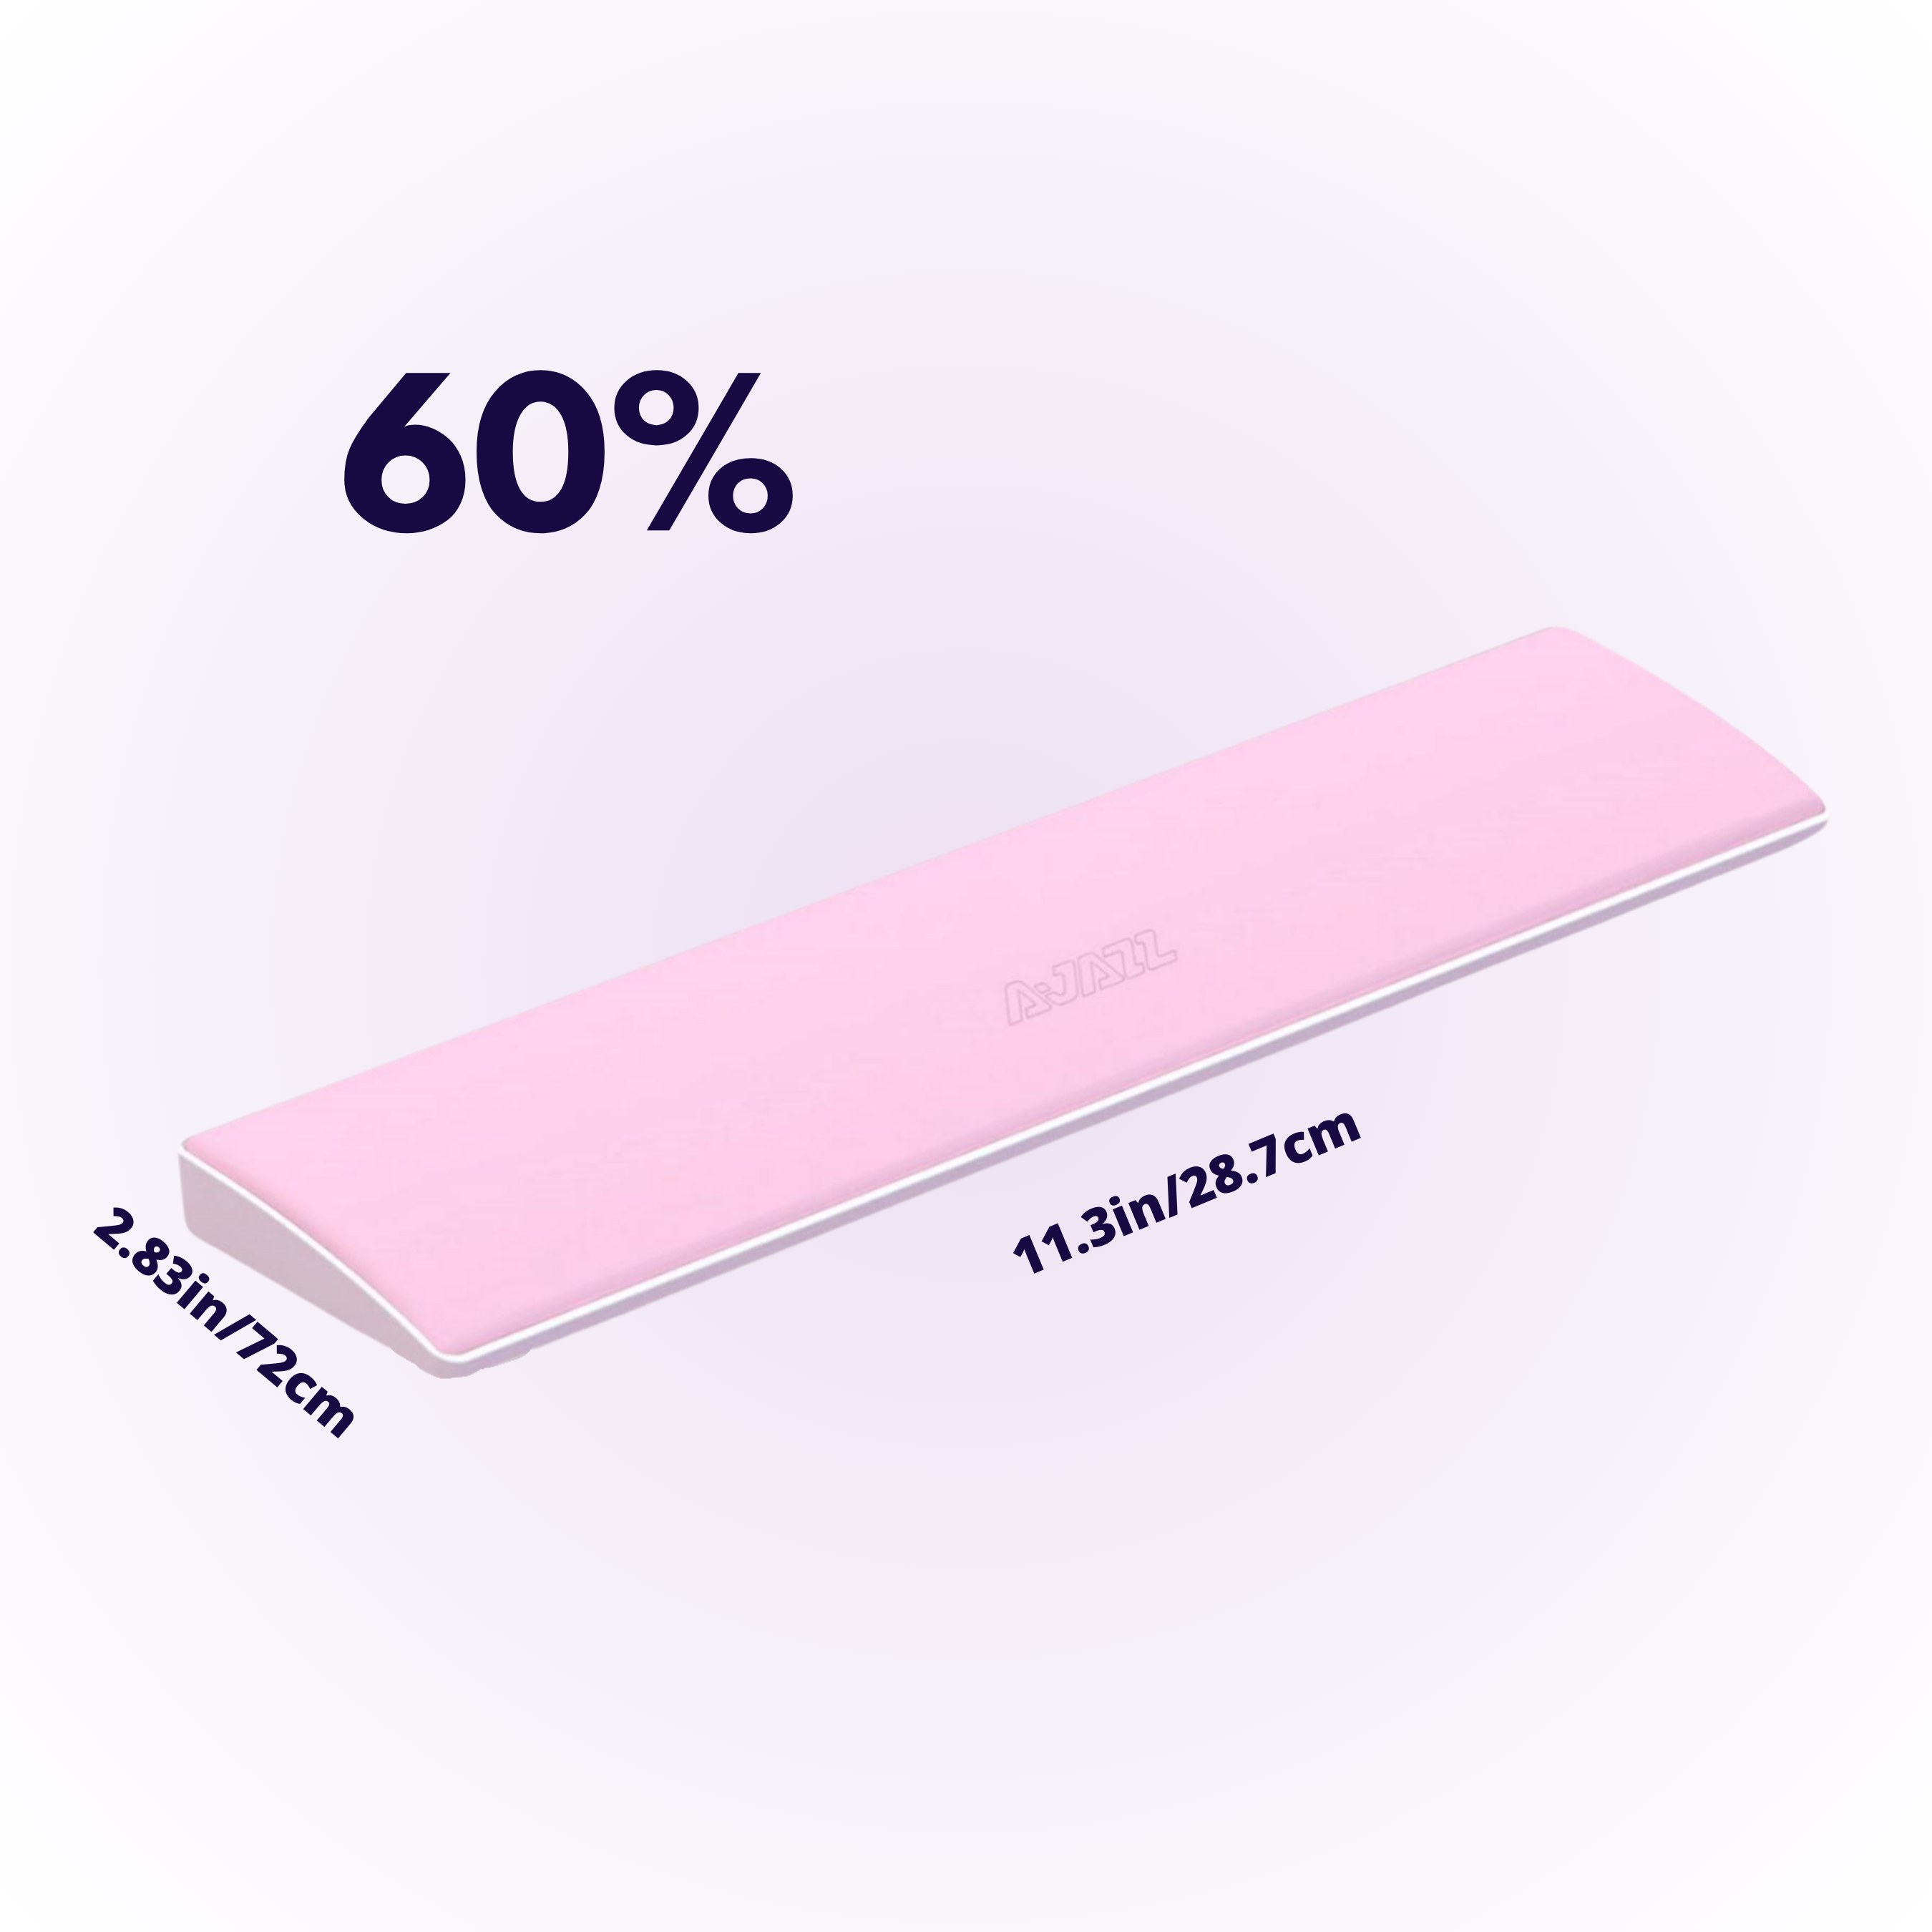 60% mechanical keyboard pink wrist rest with a white base view from an angle